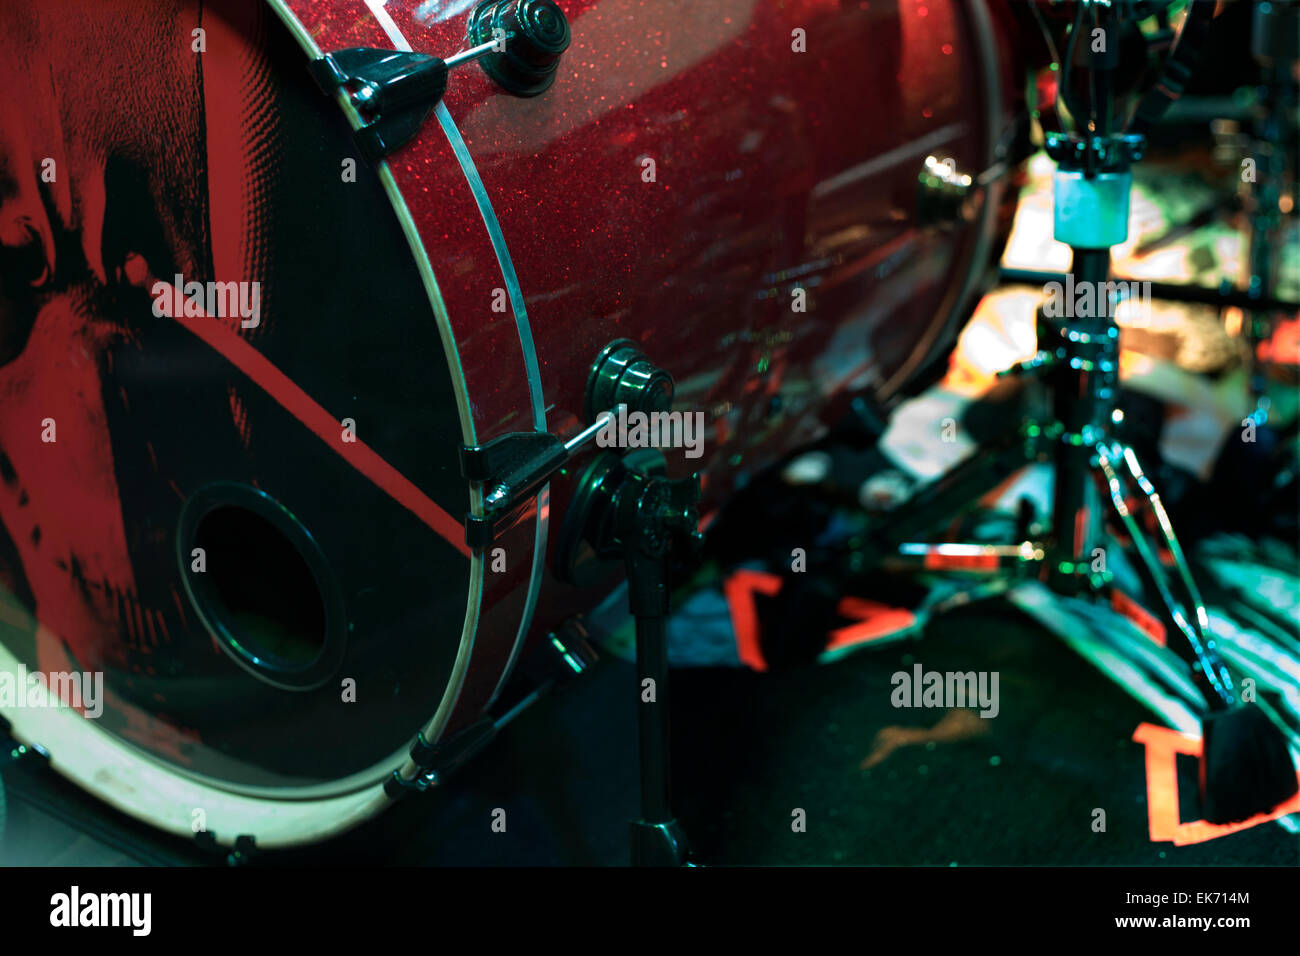 Dark image of a stage ready for a music band live performance. Drum set detail Stock Photo